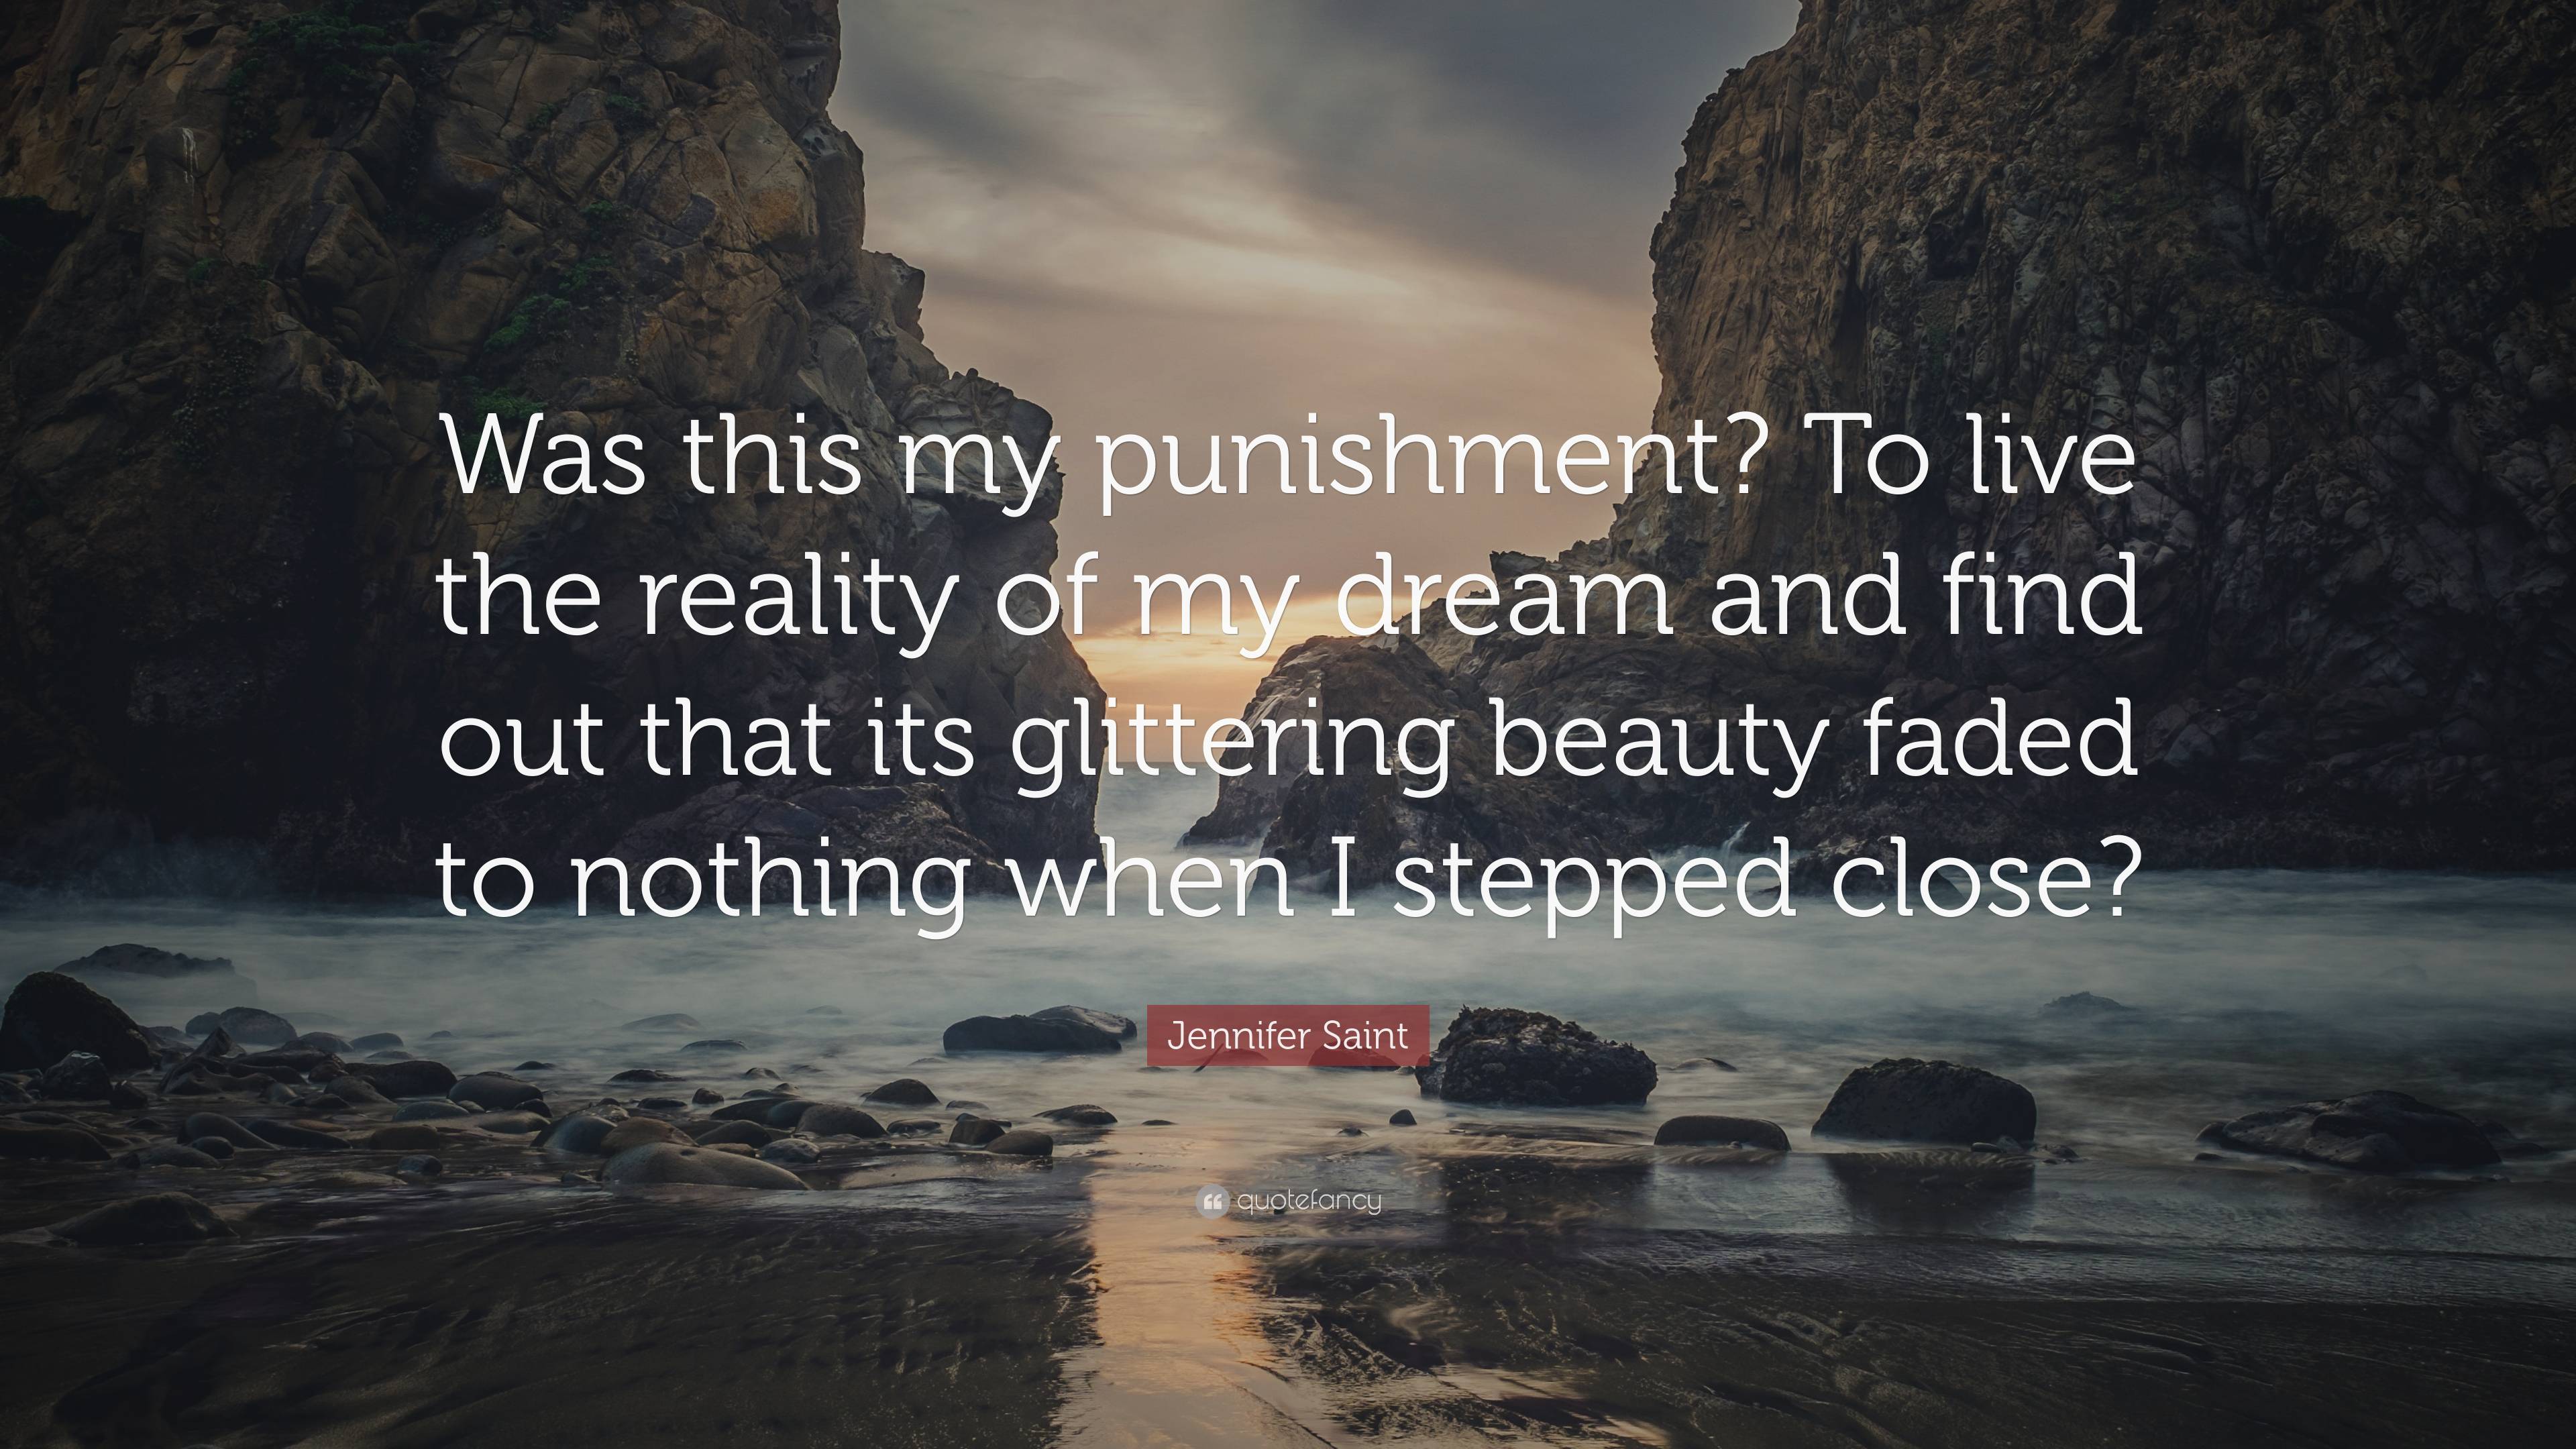 Jennifer Saint Quote: “Was this my punishment? To live the reality of ...